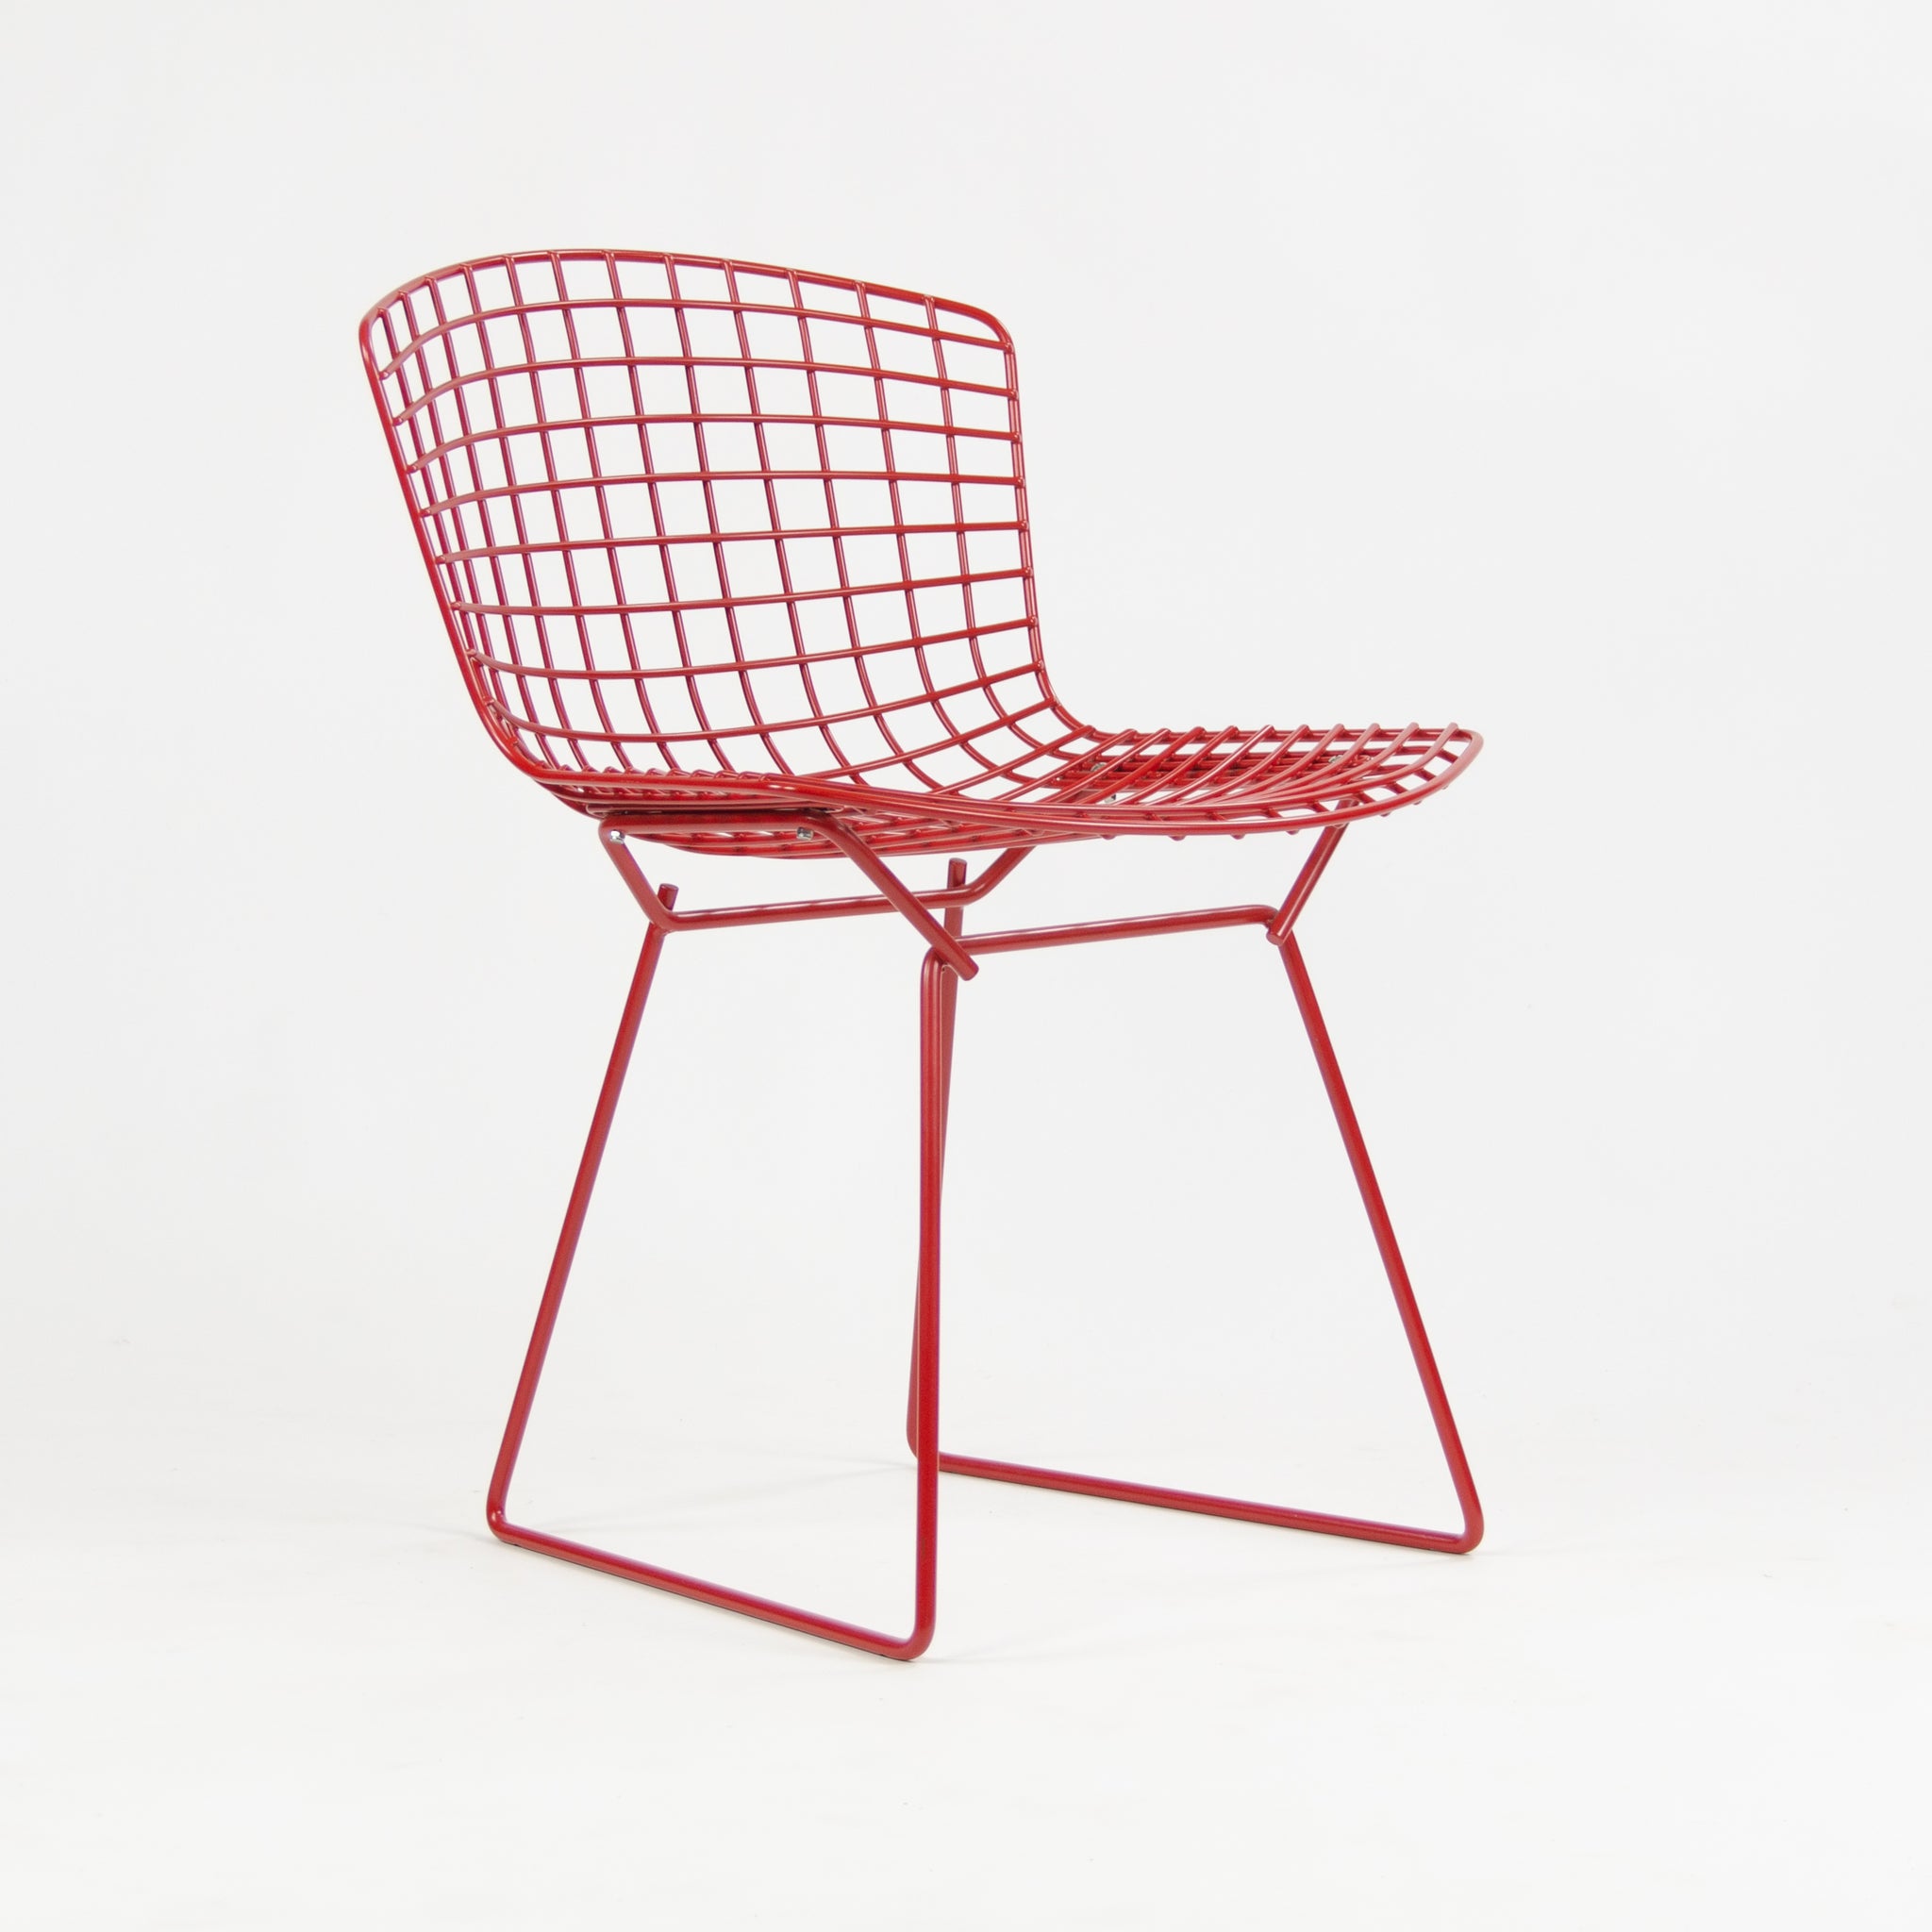 SOLD Knoll Studio International Harry Bertoia Wire Side Chair Red Frame NOS